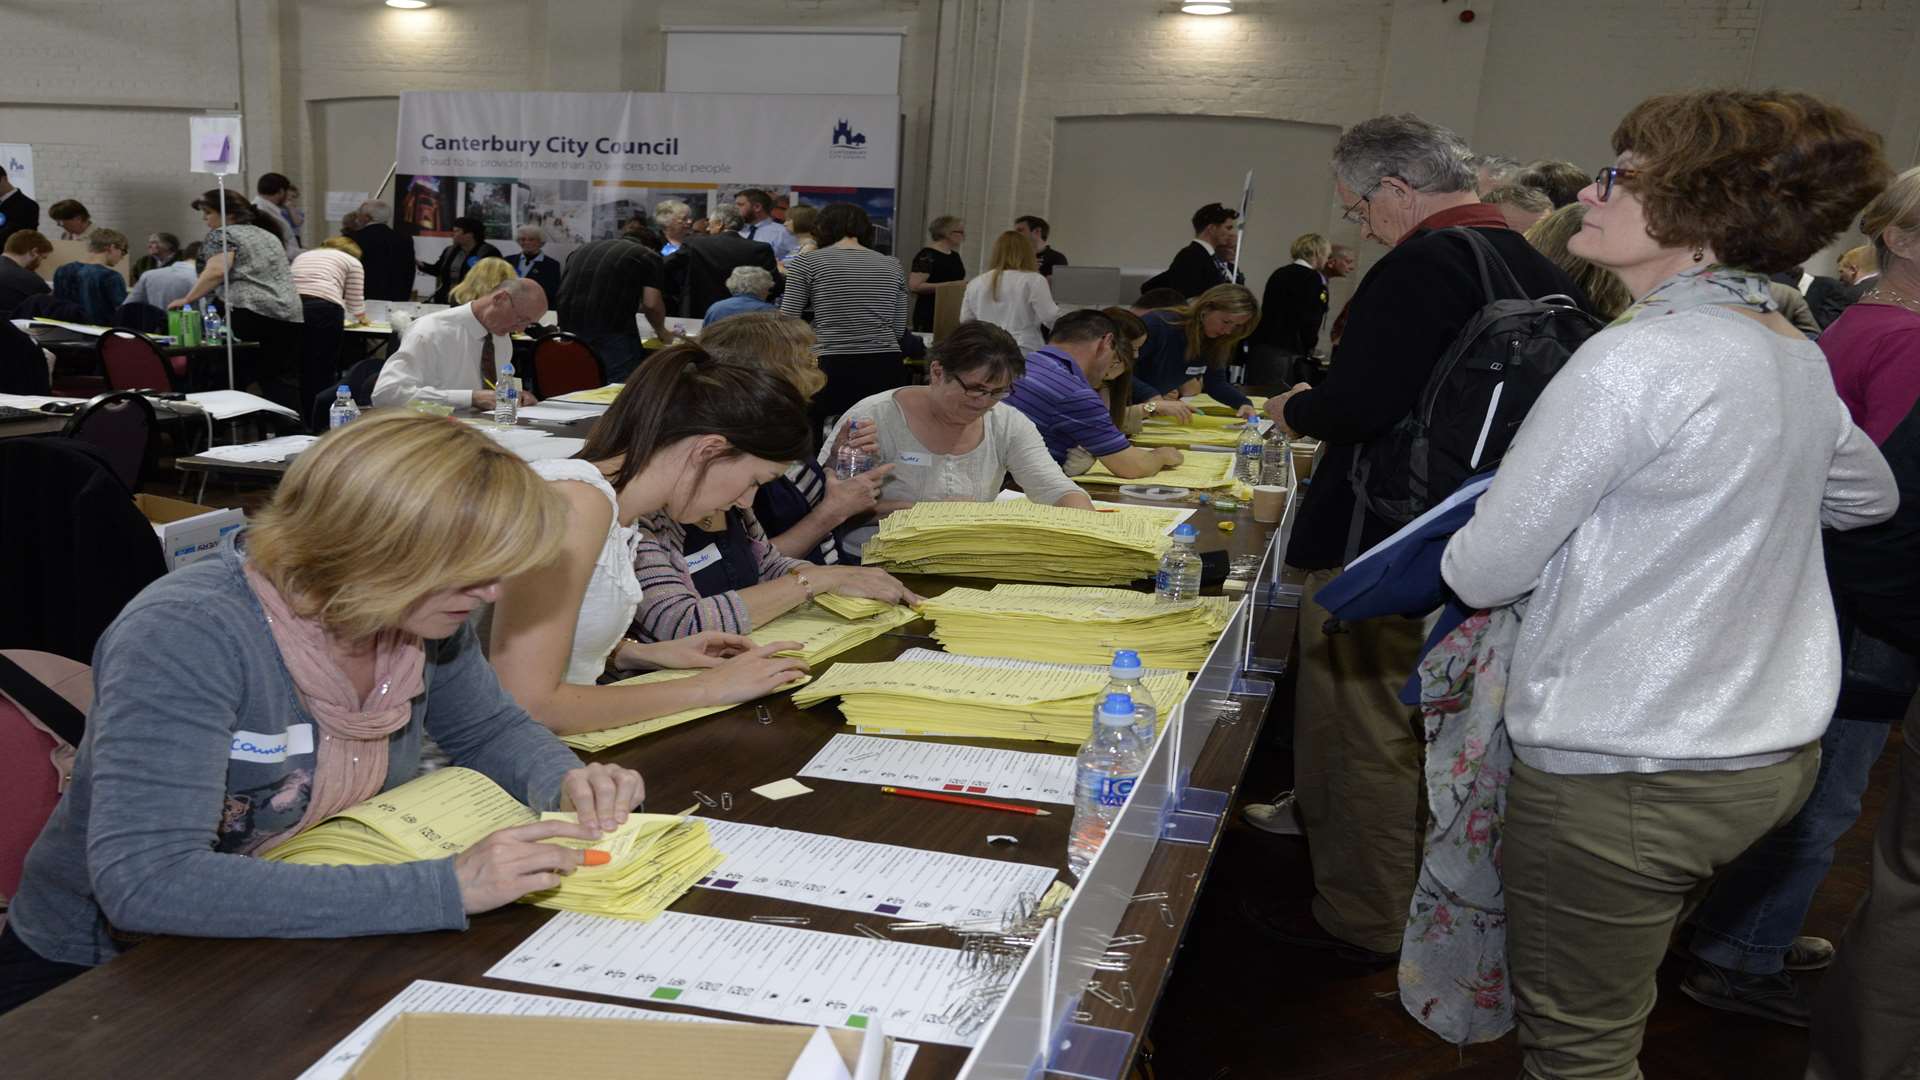 Counters at work in the Westgate Hall during the 2015 city council elections.